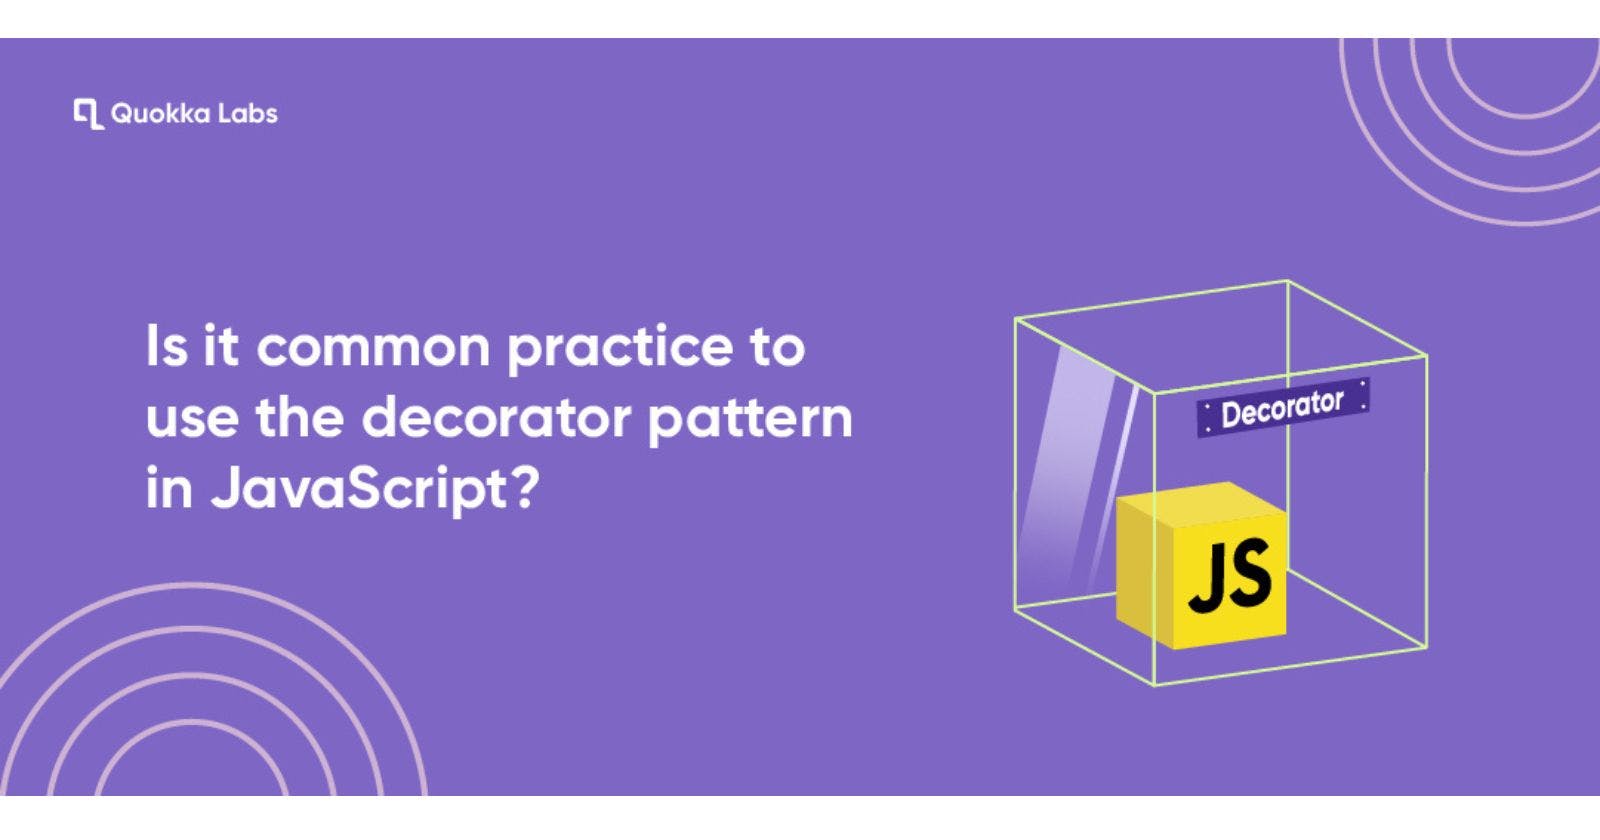 Is it Standard Practice to Use the Decorator Pattern in JavaScript?